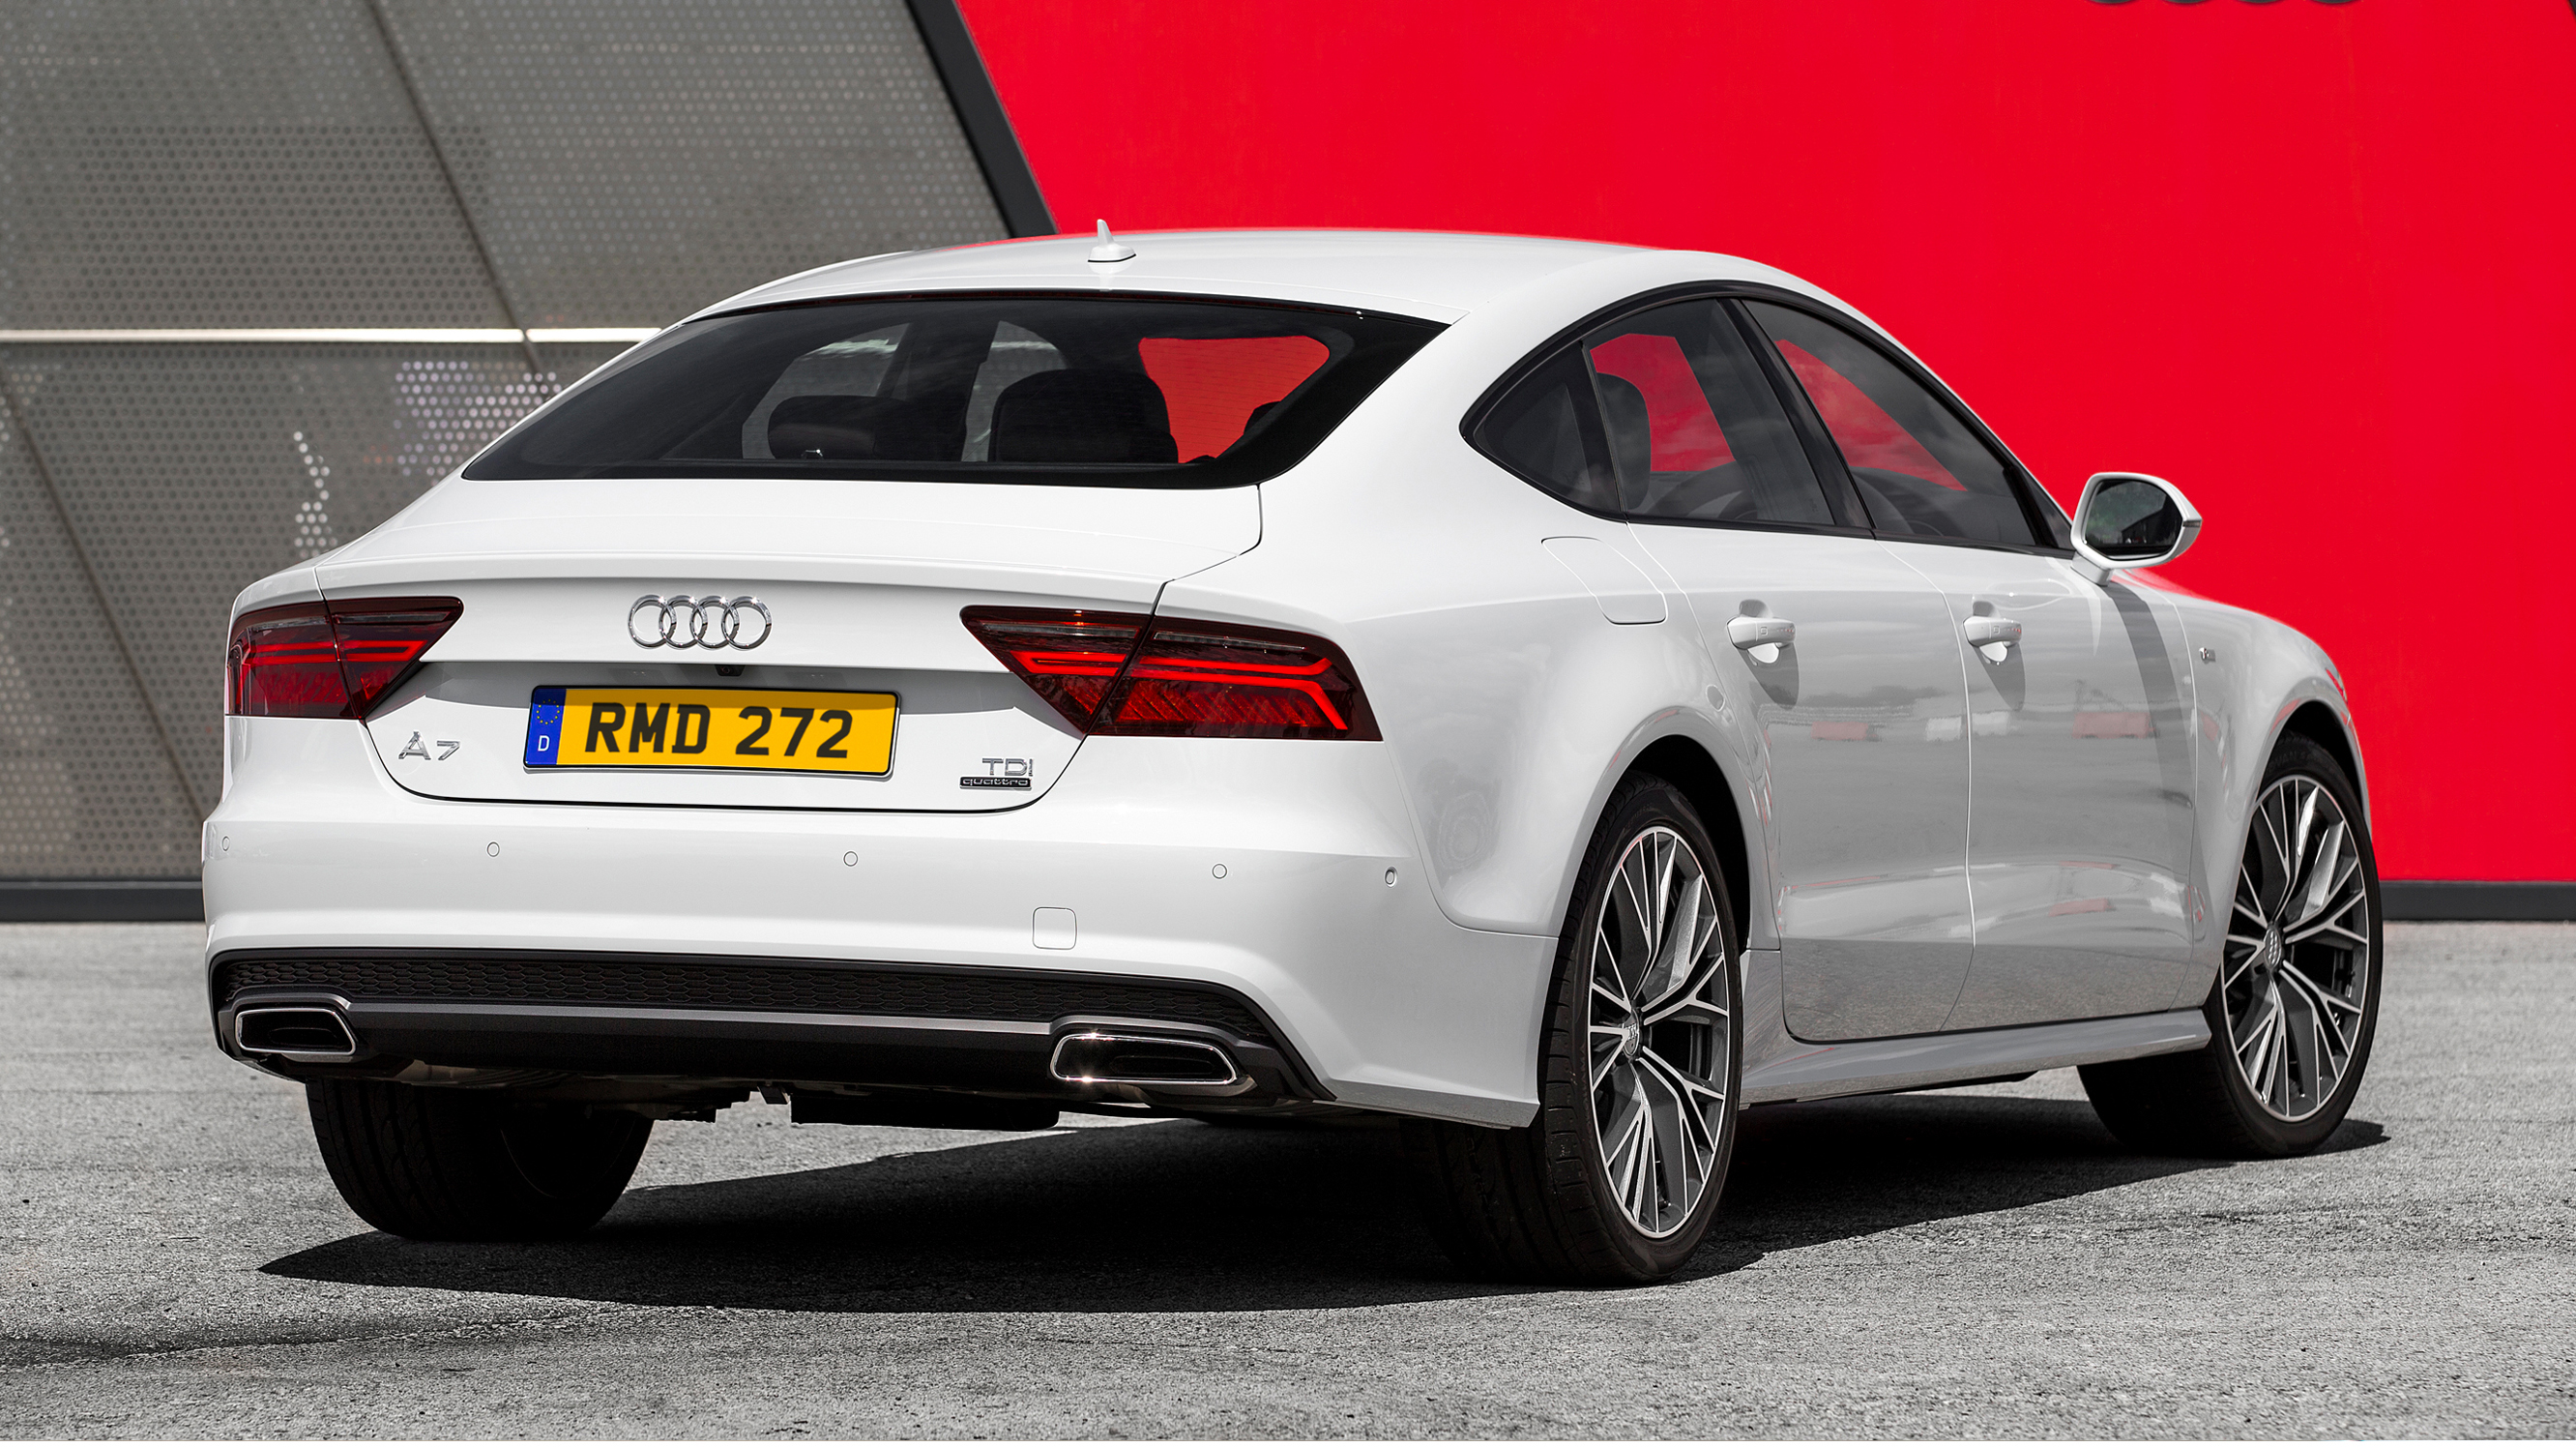 Audi A7 Sportback Driving, Engines & Performance | Top Gear